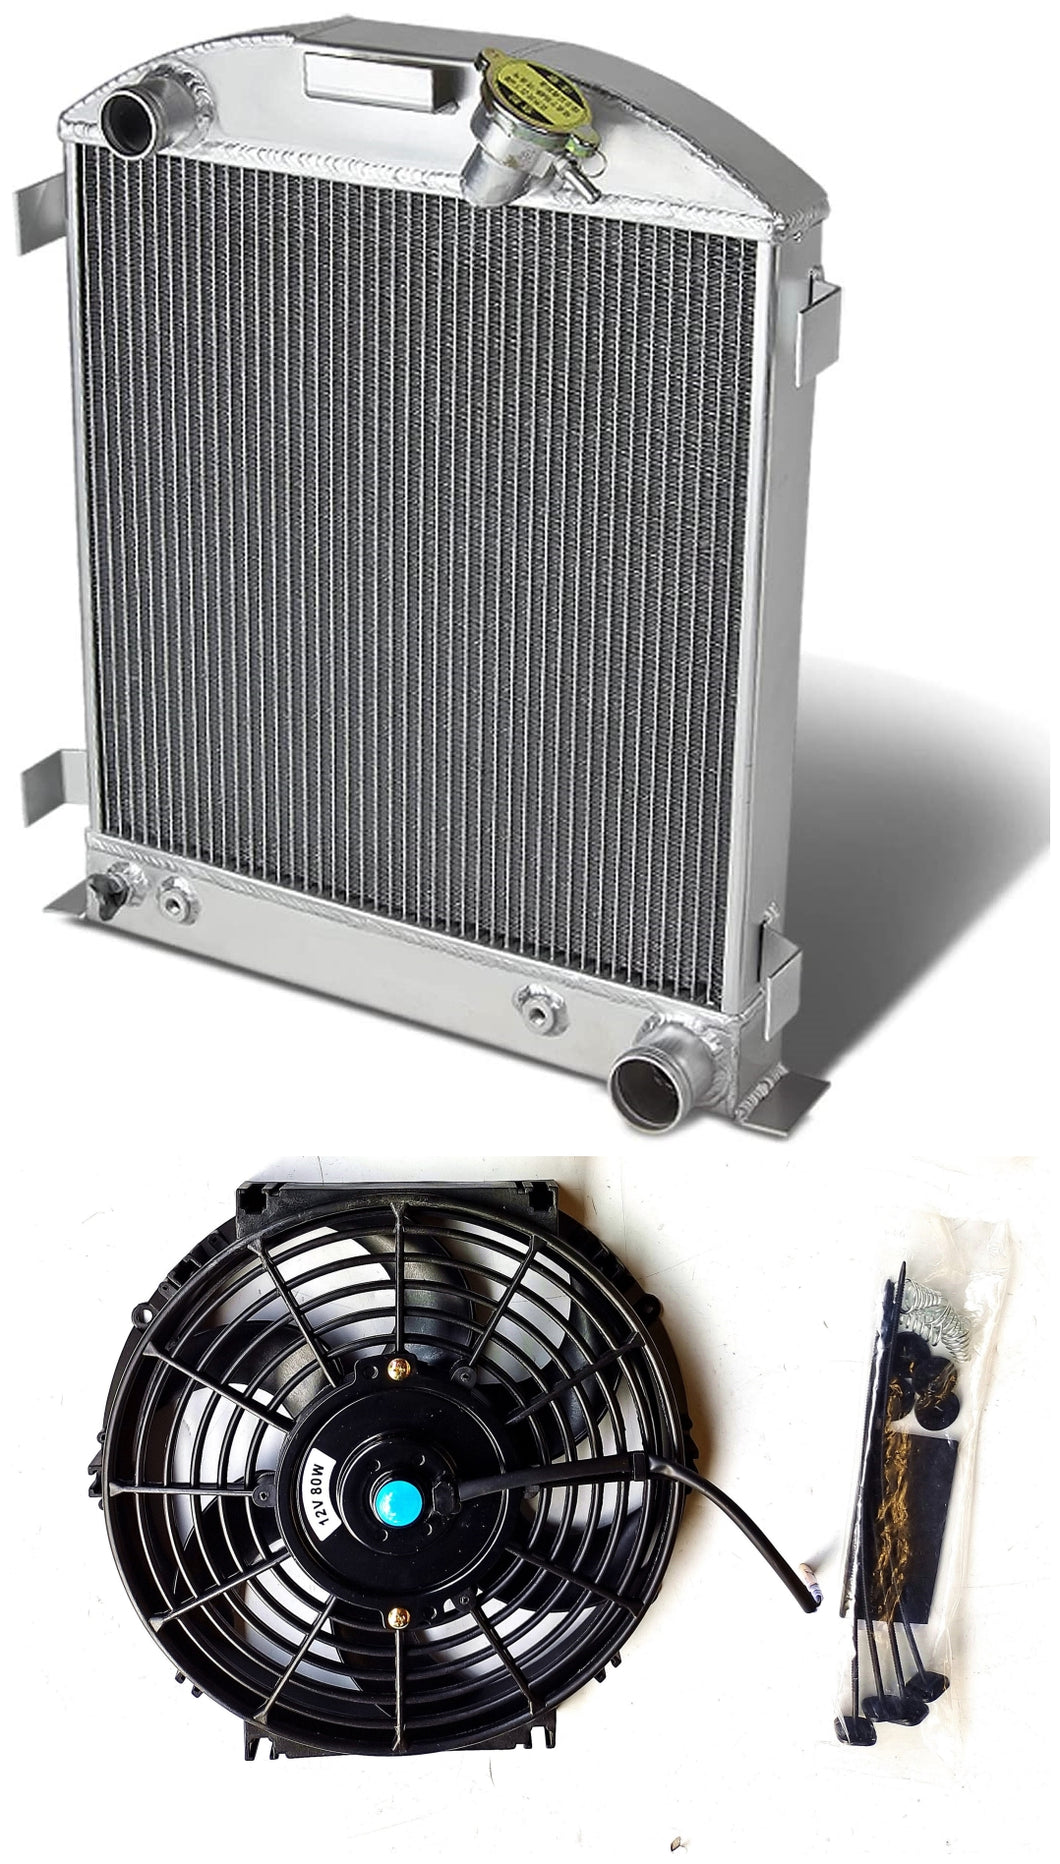 GPI 3 ROW All Aluminum Radiator + Fan For FORD CHOPPED CHEVY ENGINE 1932